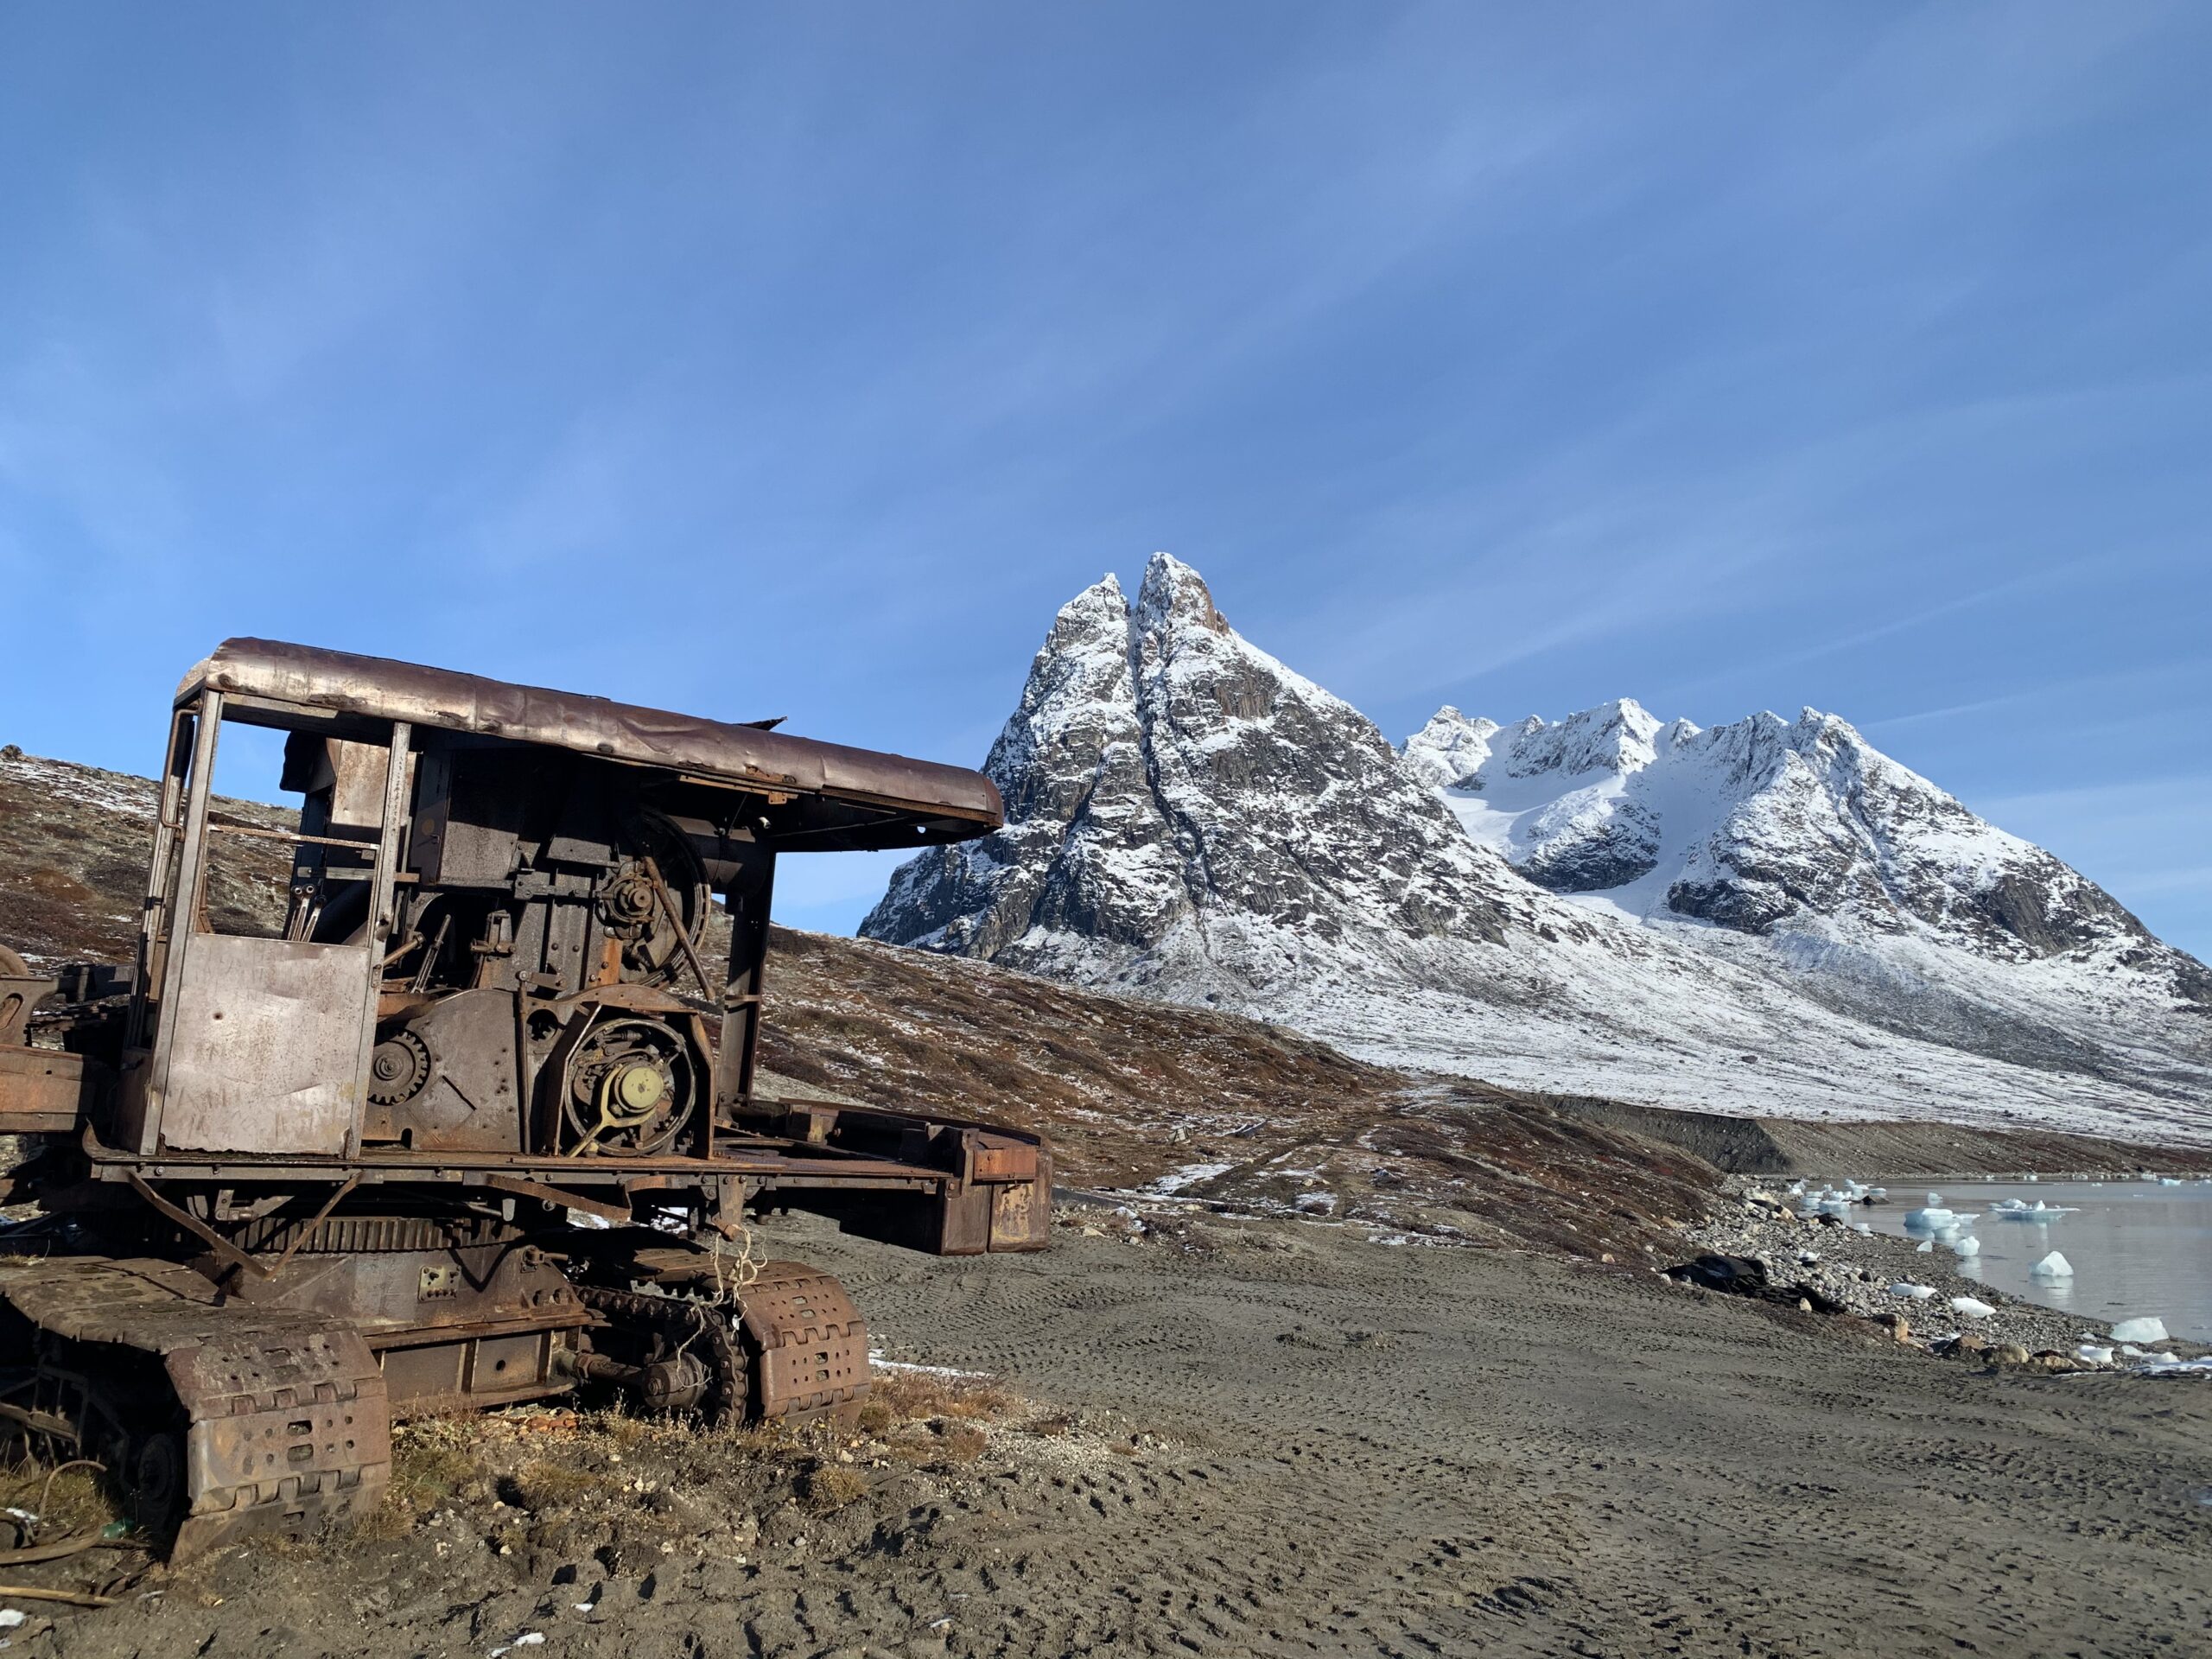 Remains at the old american airbase, Ikateq - Photo by Aviaja Ørum Kristiansen - Visit East Greenland